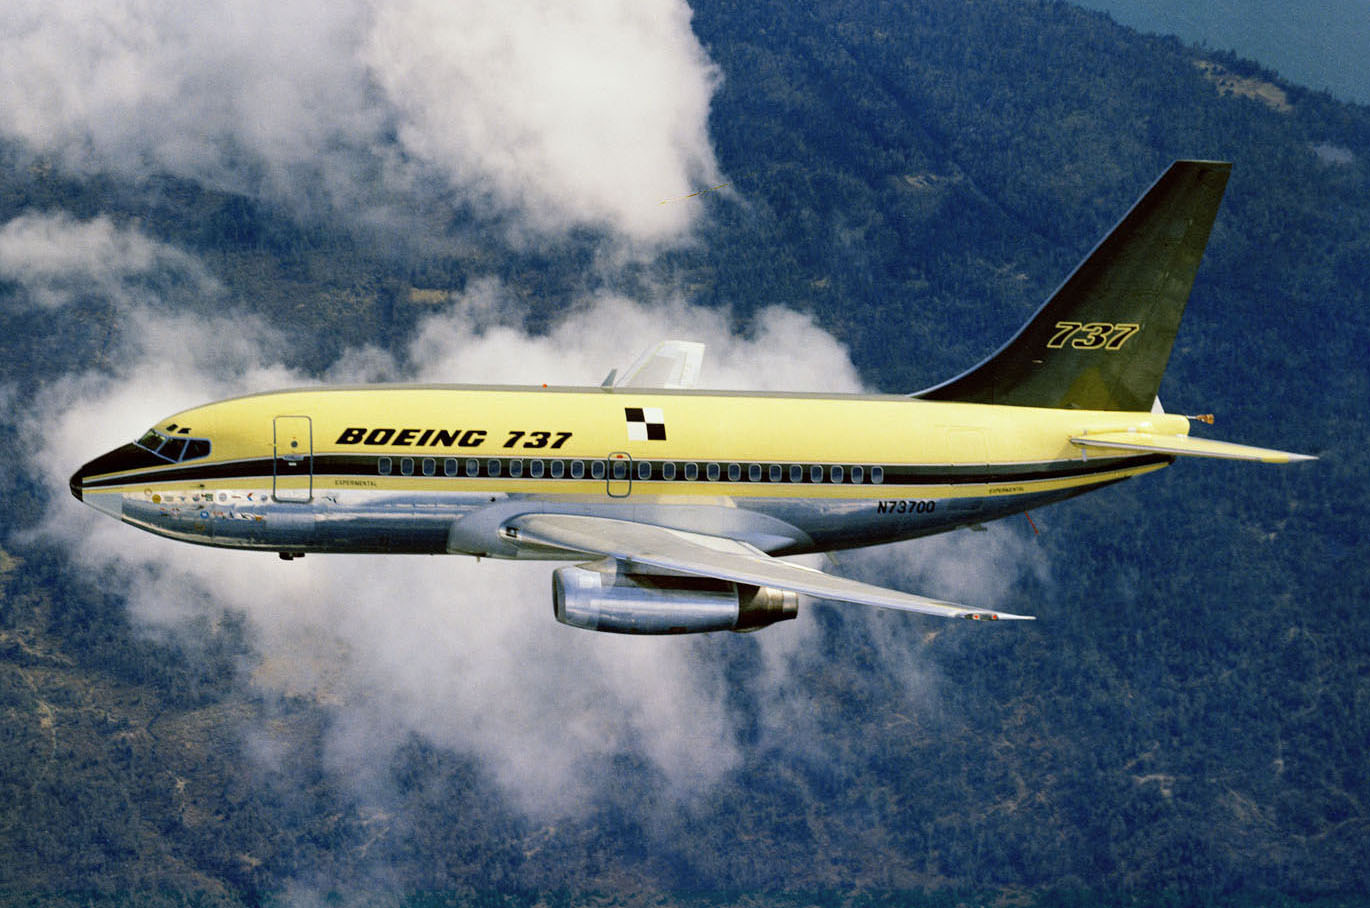 A PICTURE OF THE FIRST BOEING 737